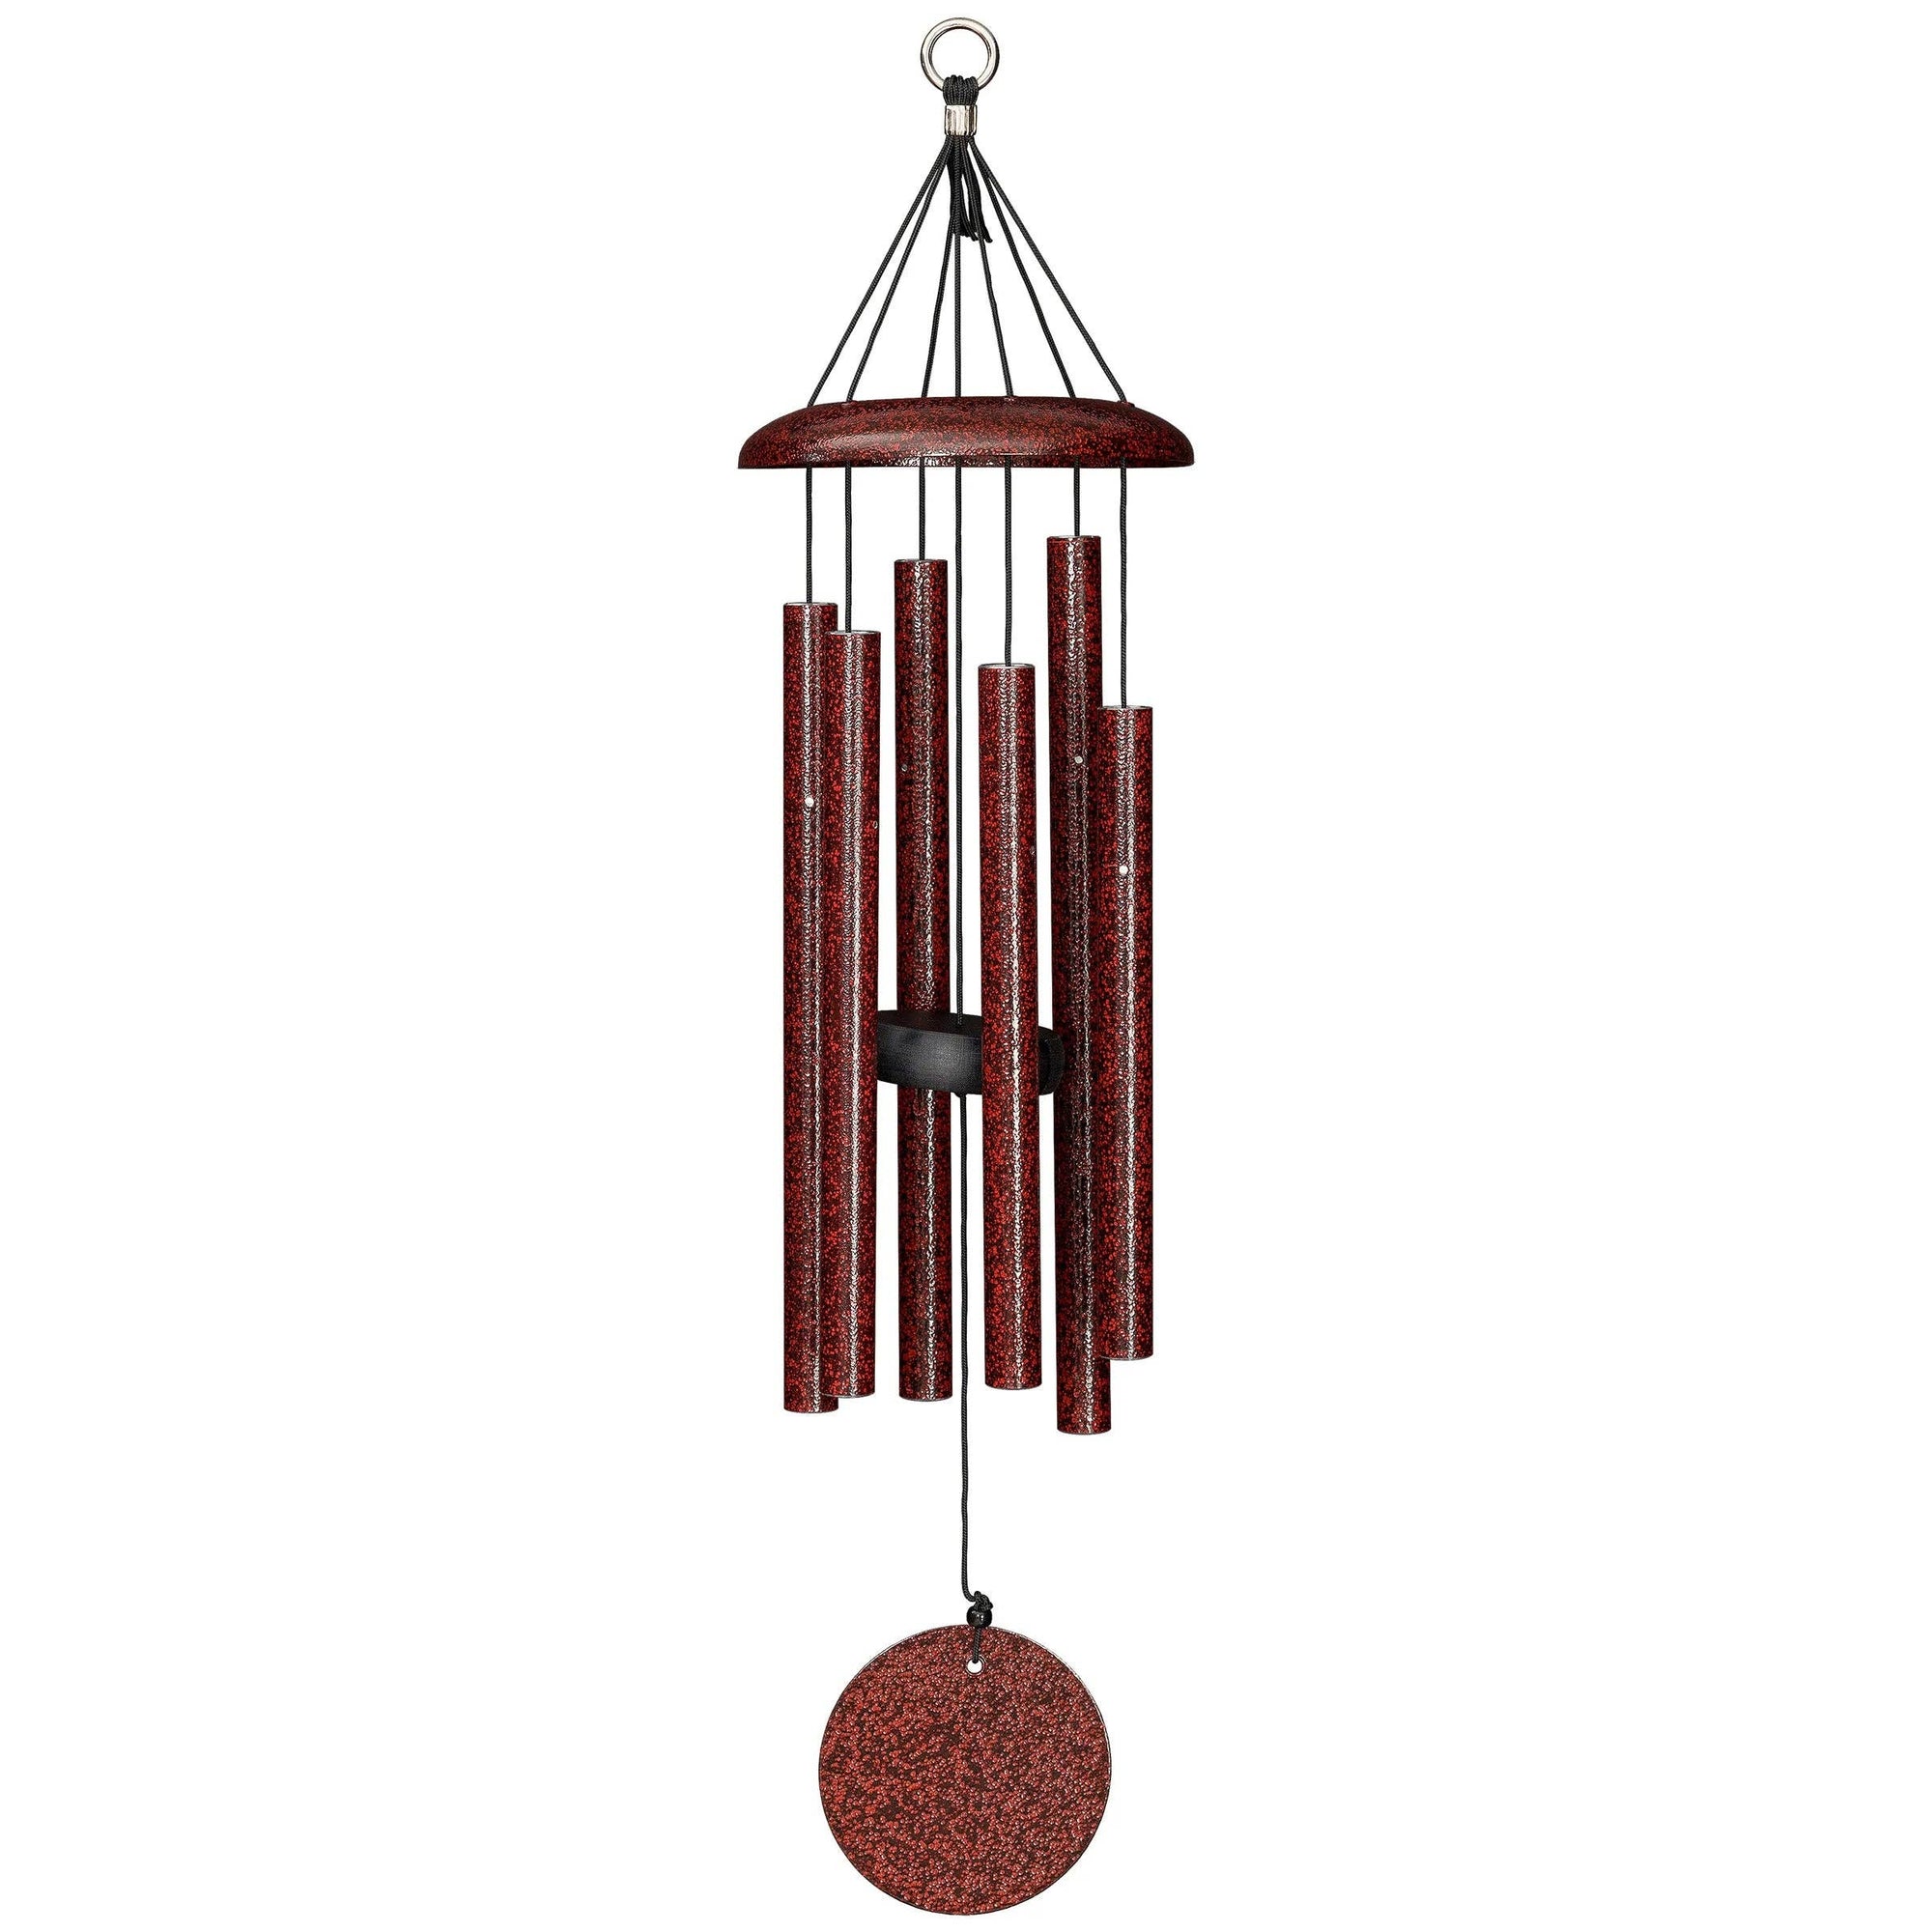 A budget-friendly 27" Windchime Corinthian Bells®, perfect for decor, hanging on a white background.